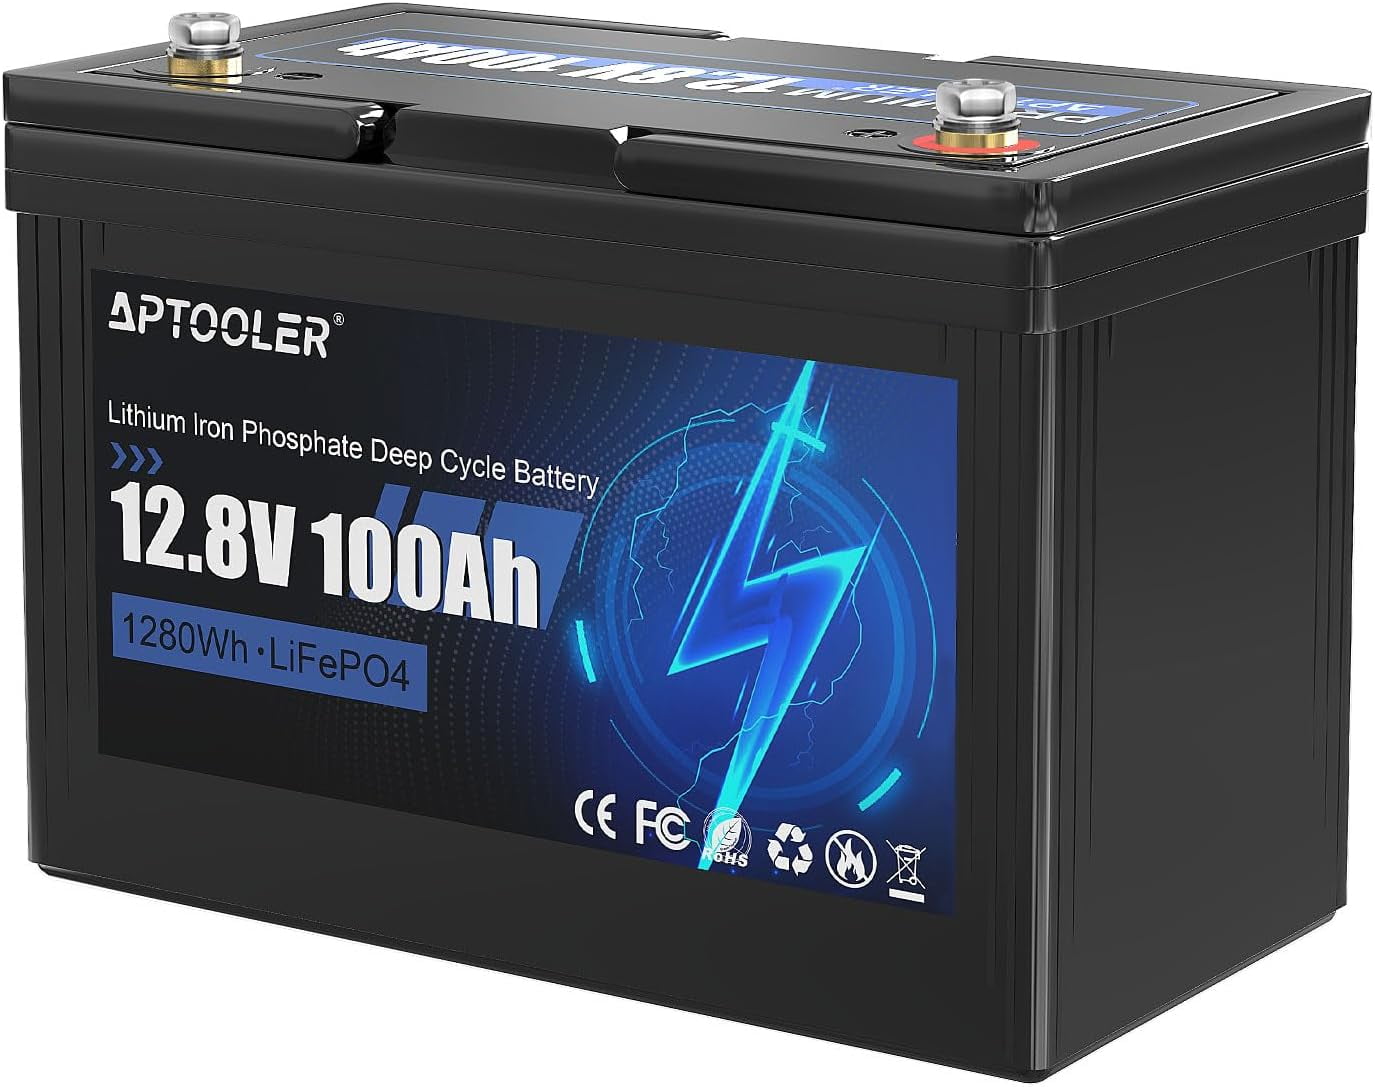 Redodo 12V 100Ah Mini LiFePO4 Deep Cycle Lithium Battery with 100A BMS for  RV Boat